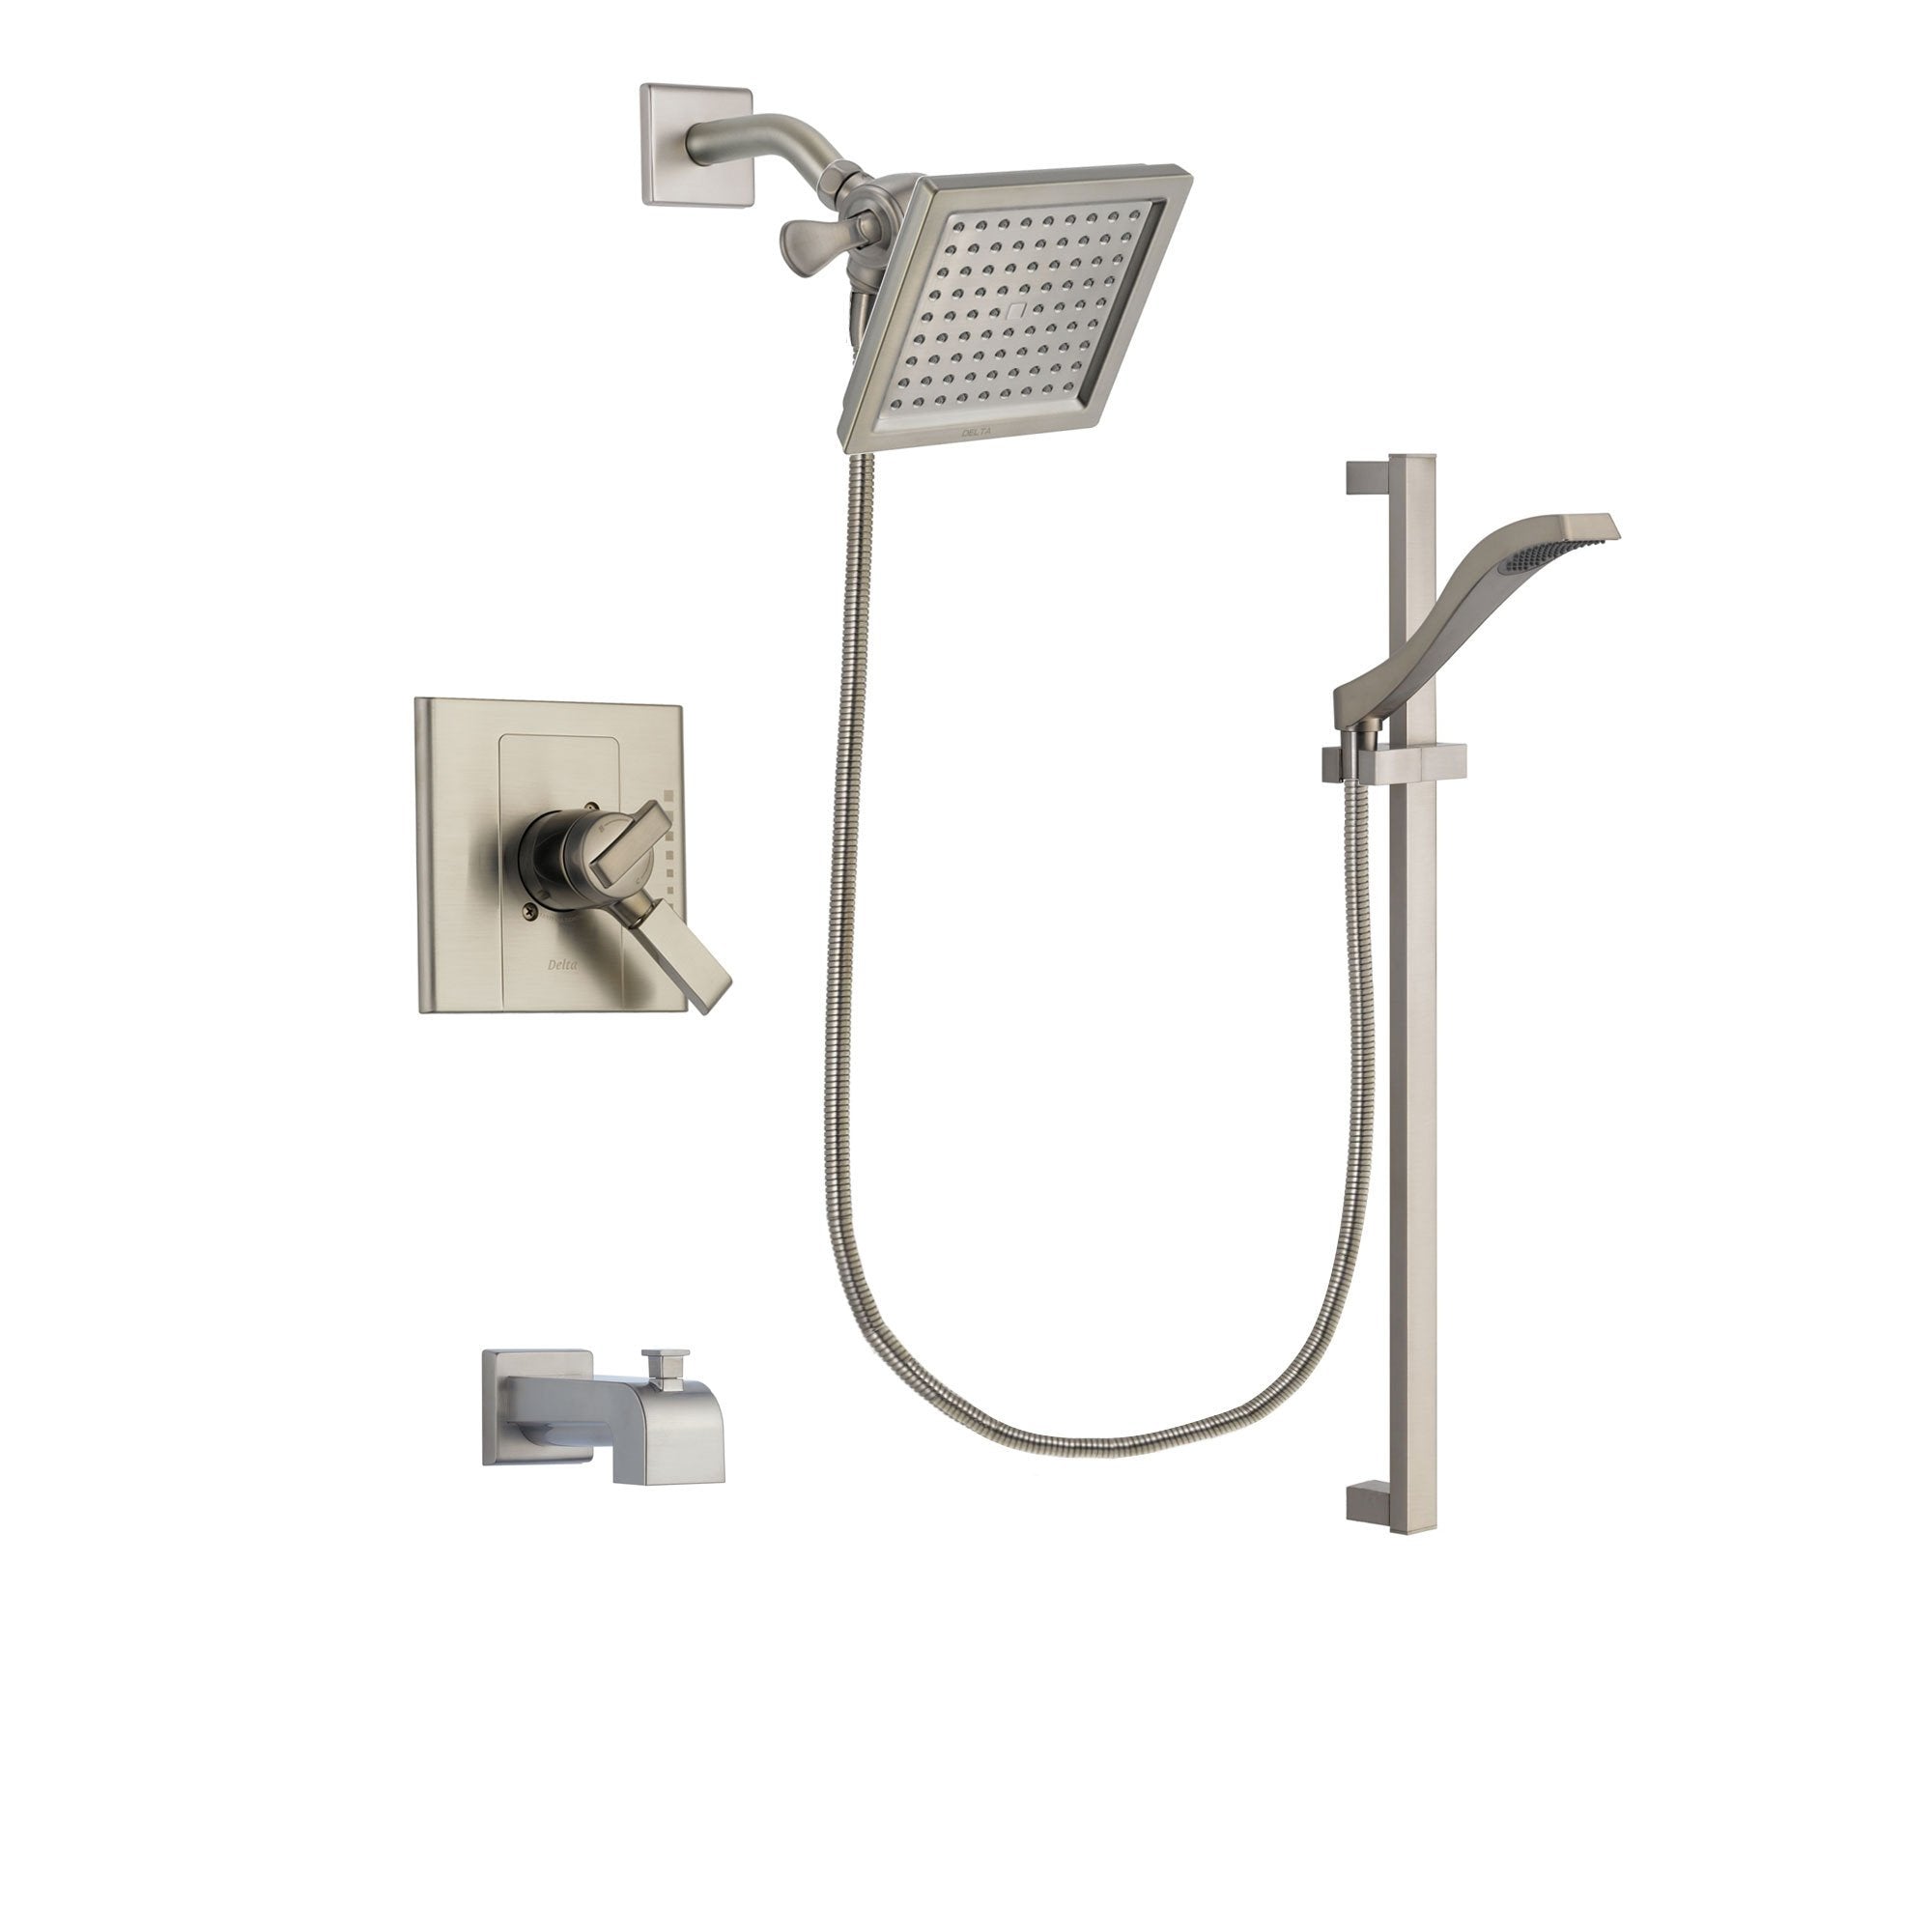 Delta Arzo Stainless Steel Finish Dual Control Tub and Shower Faucet System Package with 6.5-inch Square Rain Showerhead and Handheld Shower with Slide Bar Includes Rough-in Valve and Tub Spout DSP2253V